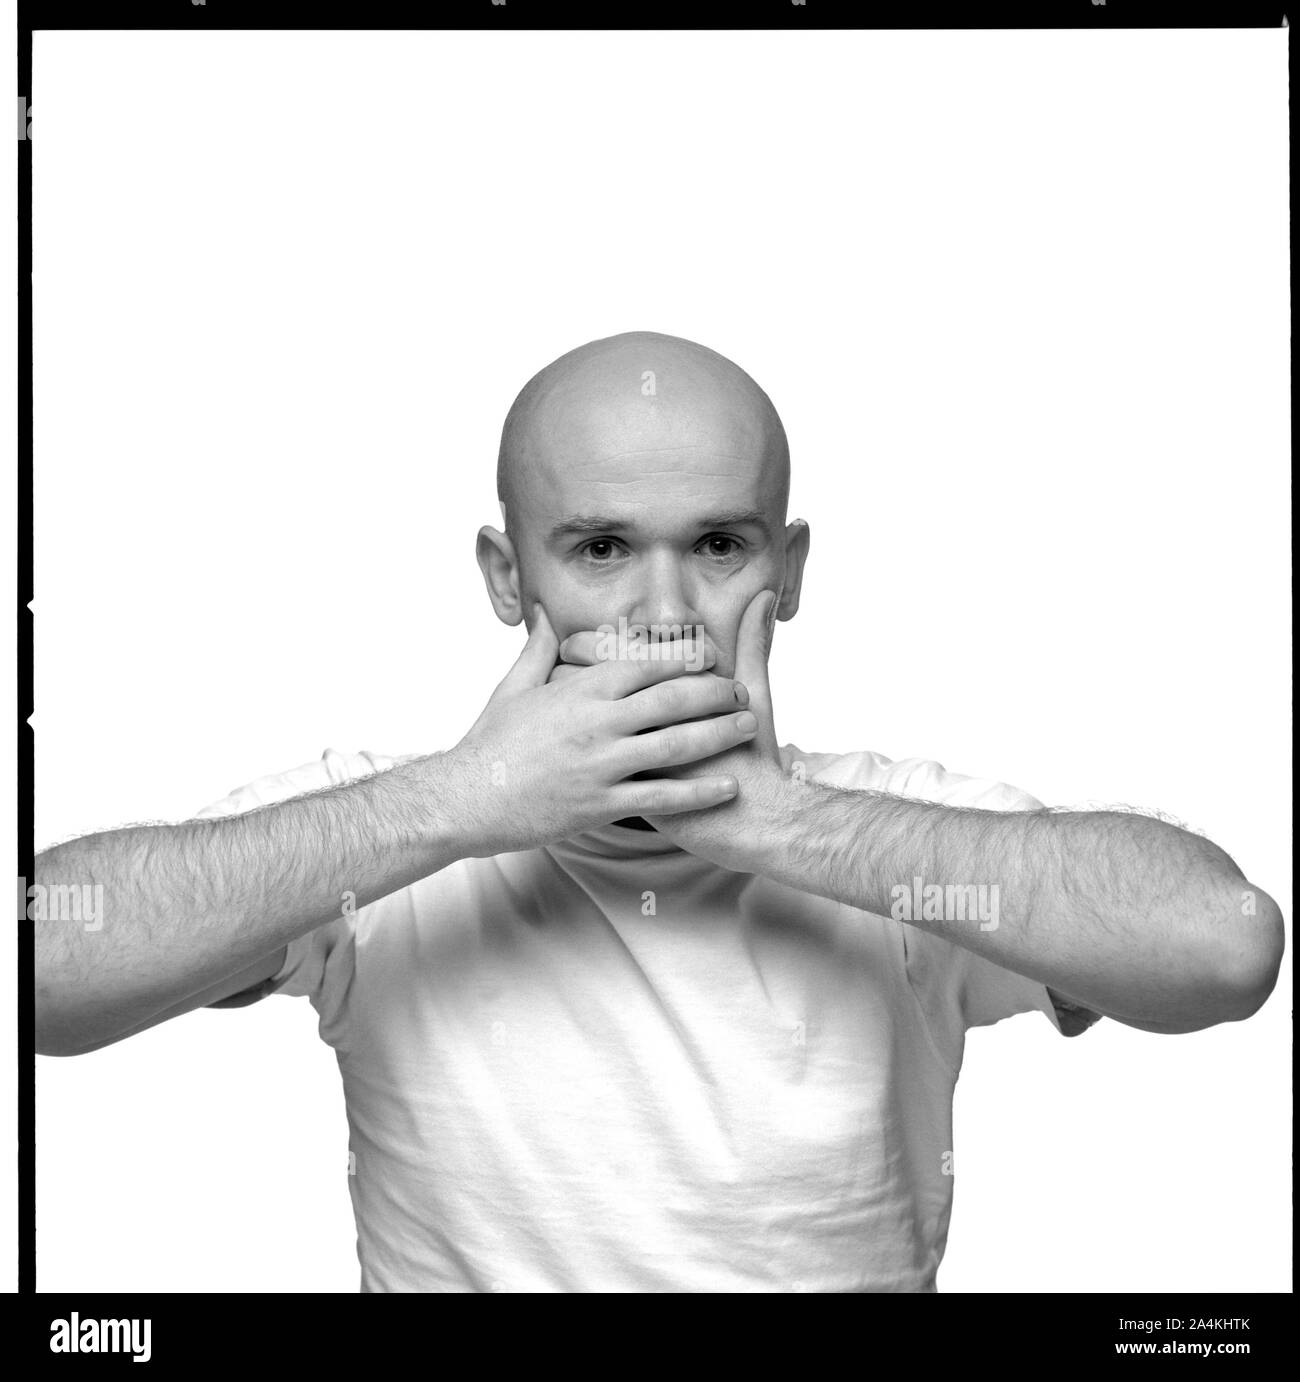 A baldheaded young man holding his hands pressed to his mouth. Stock Photo